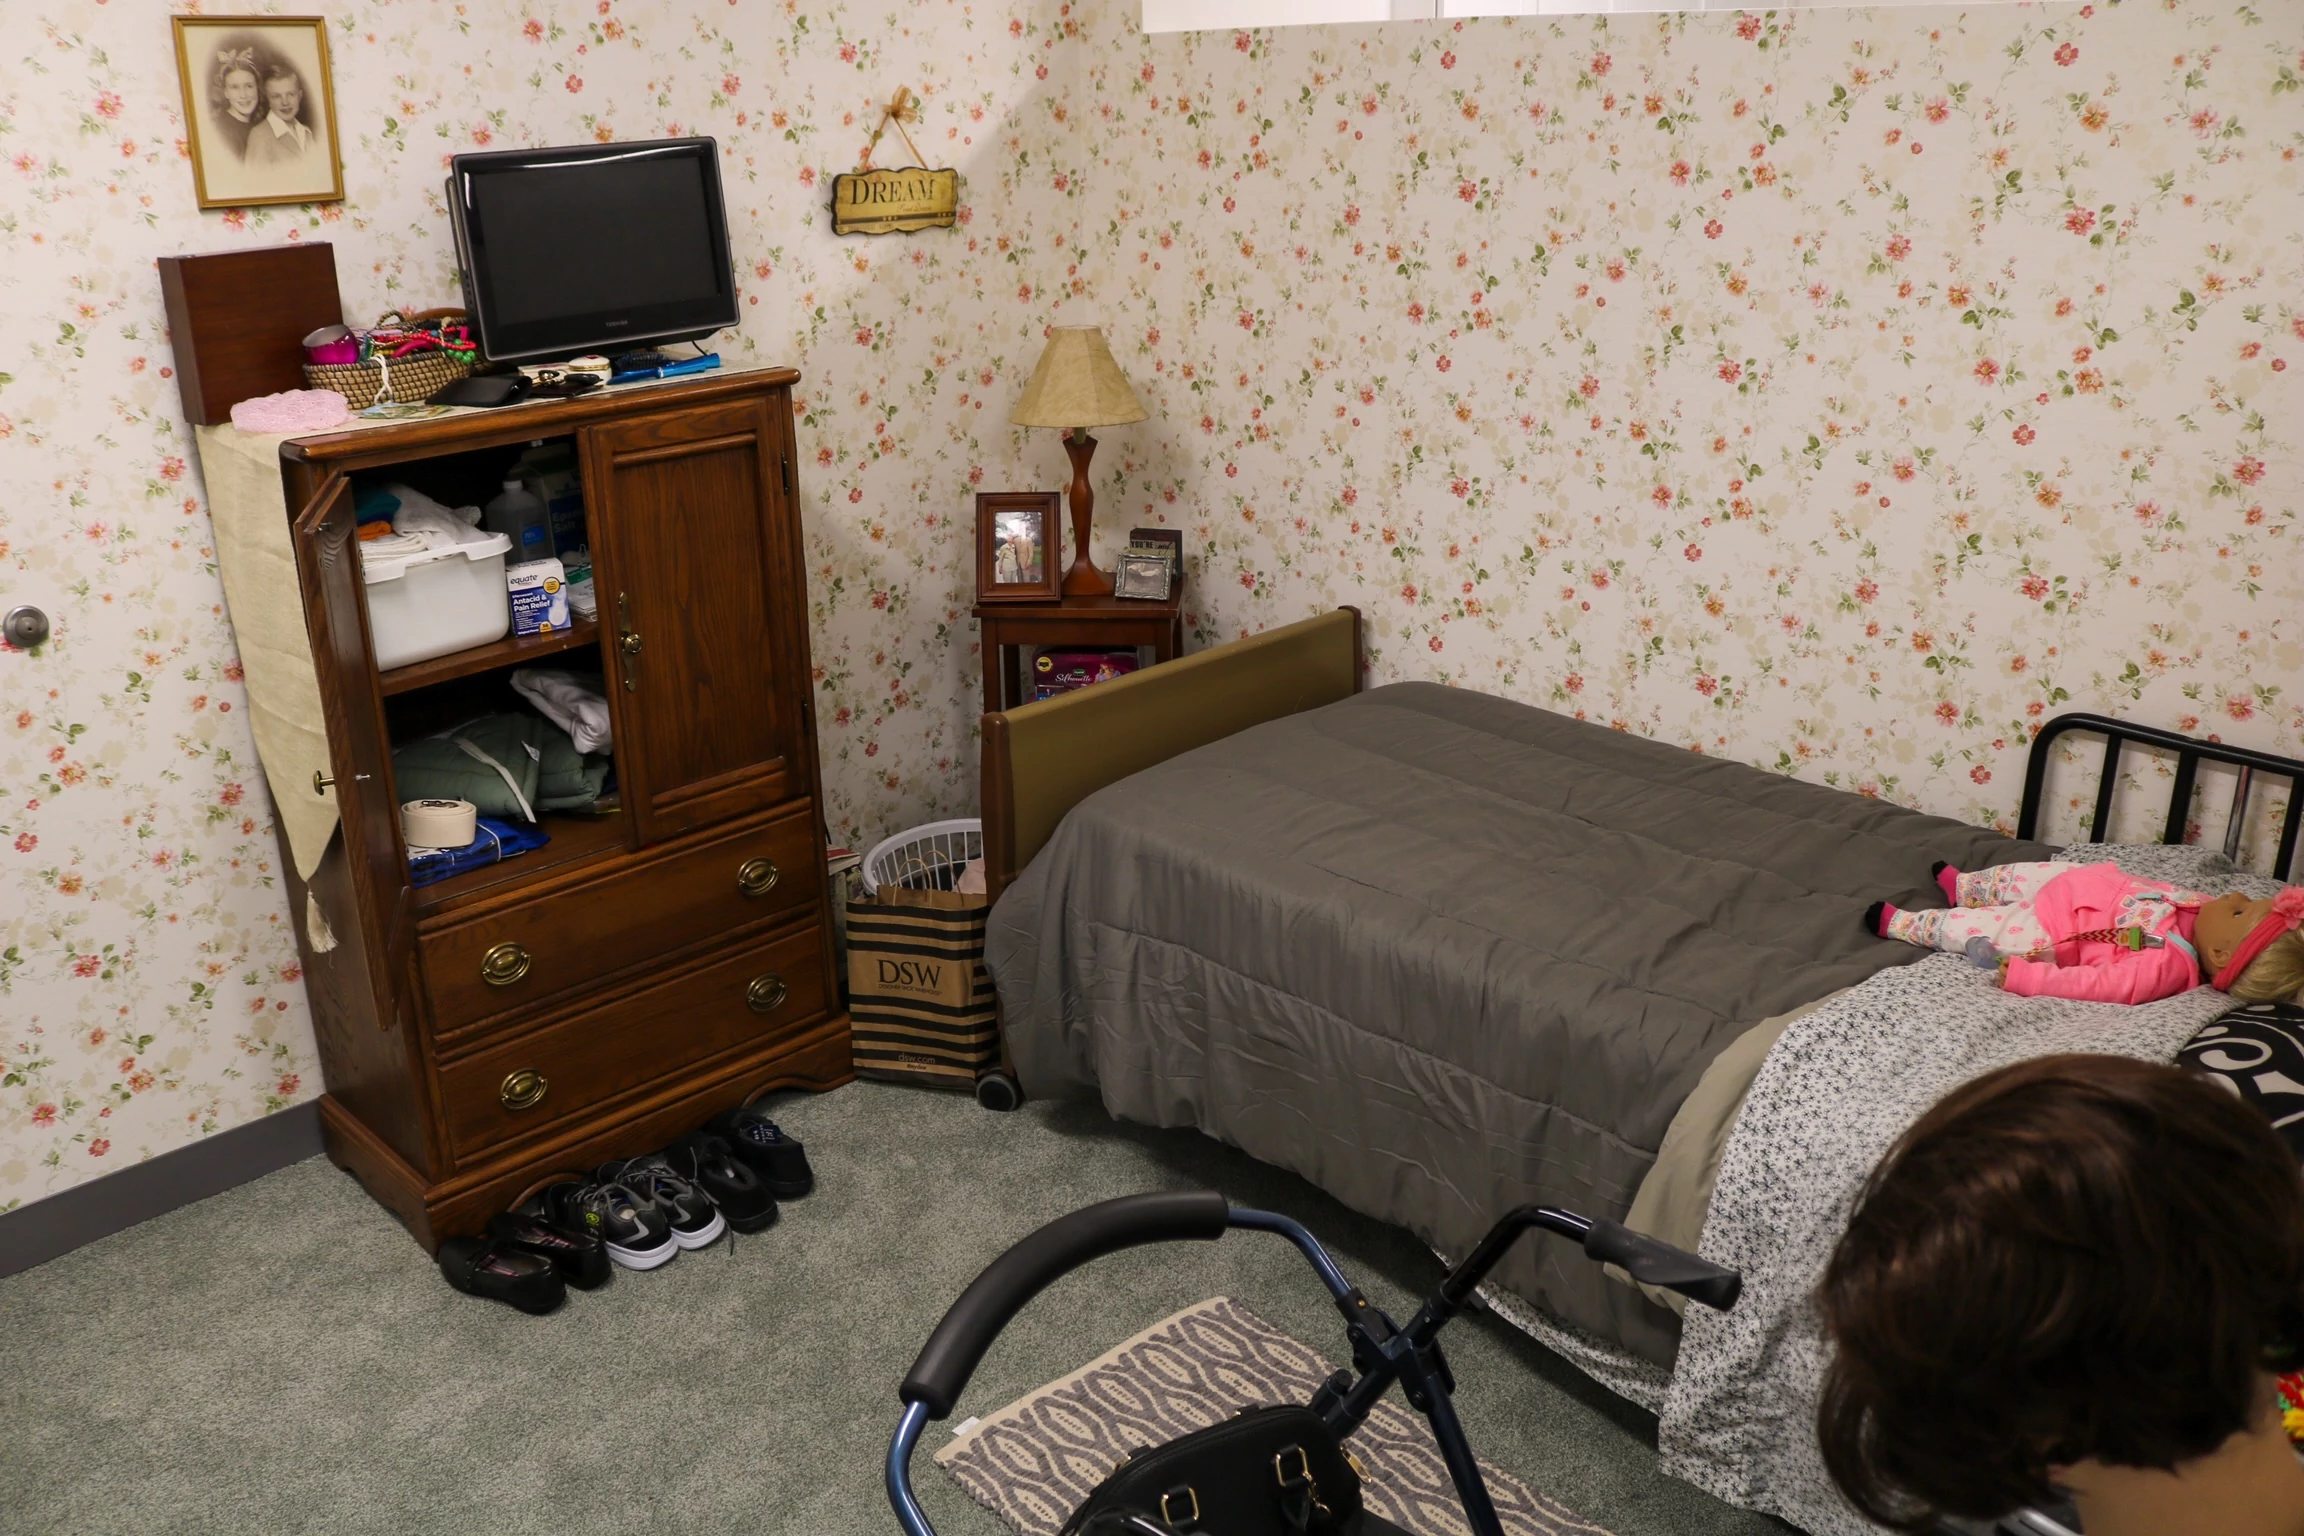 Our caregiver training room consists of many household items that can be obstacles for seniors